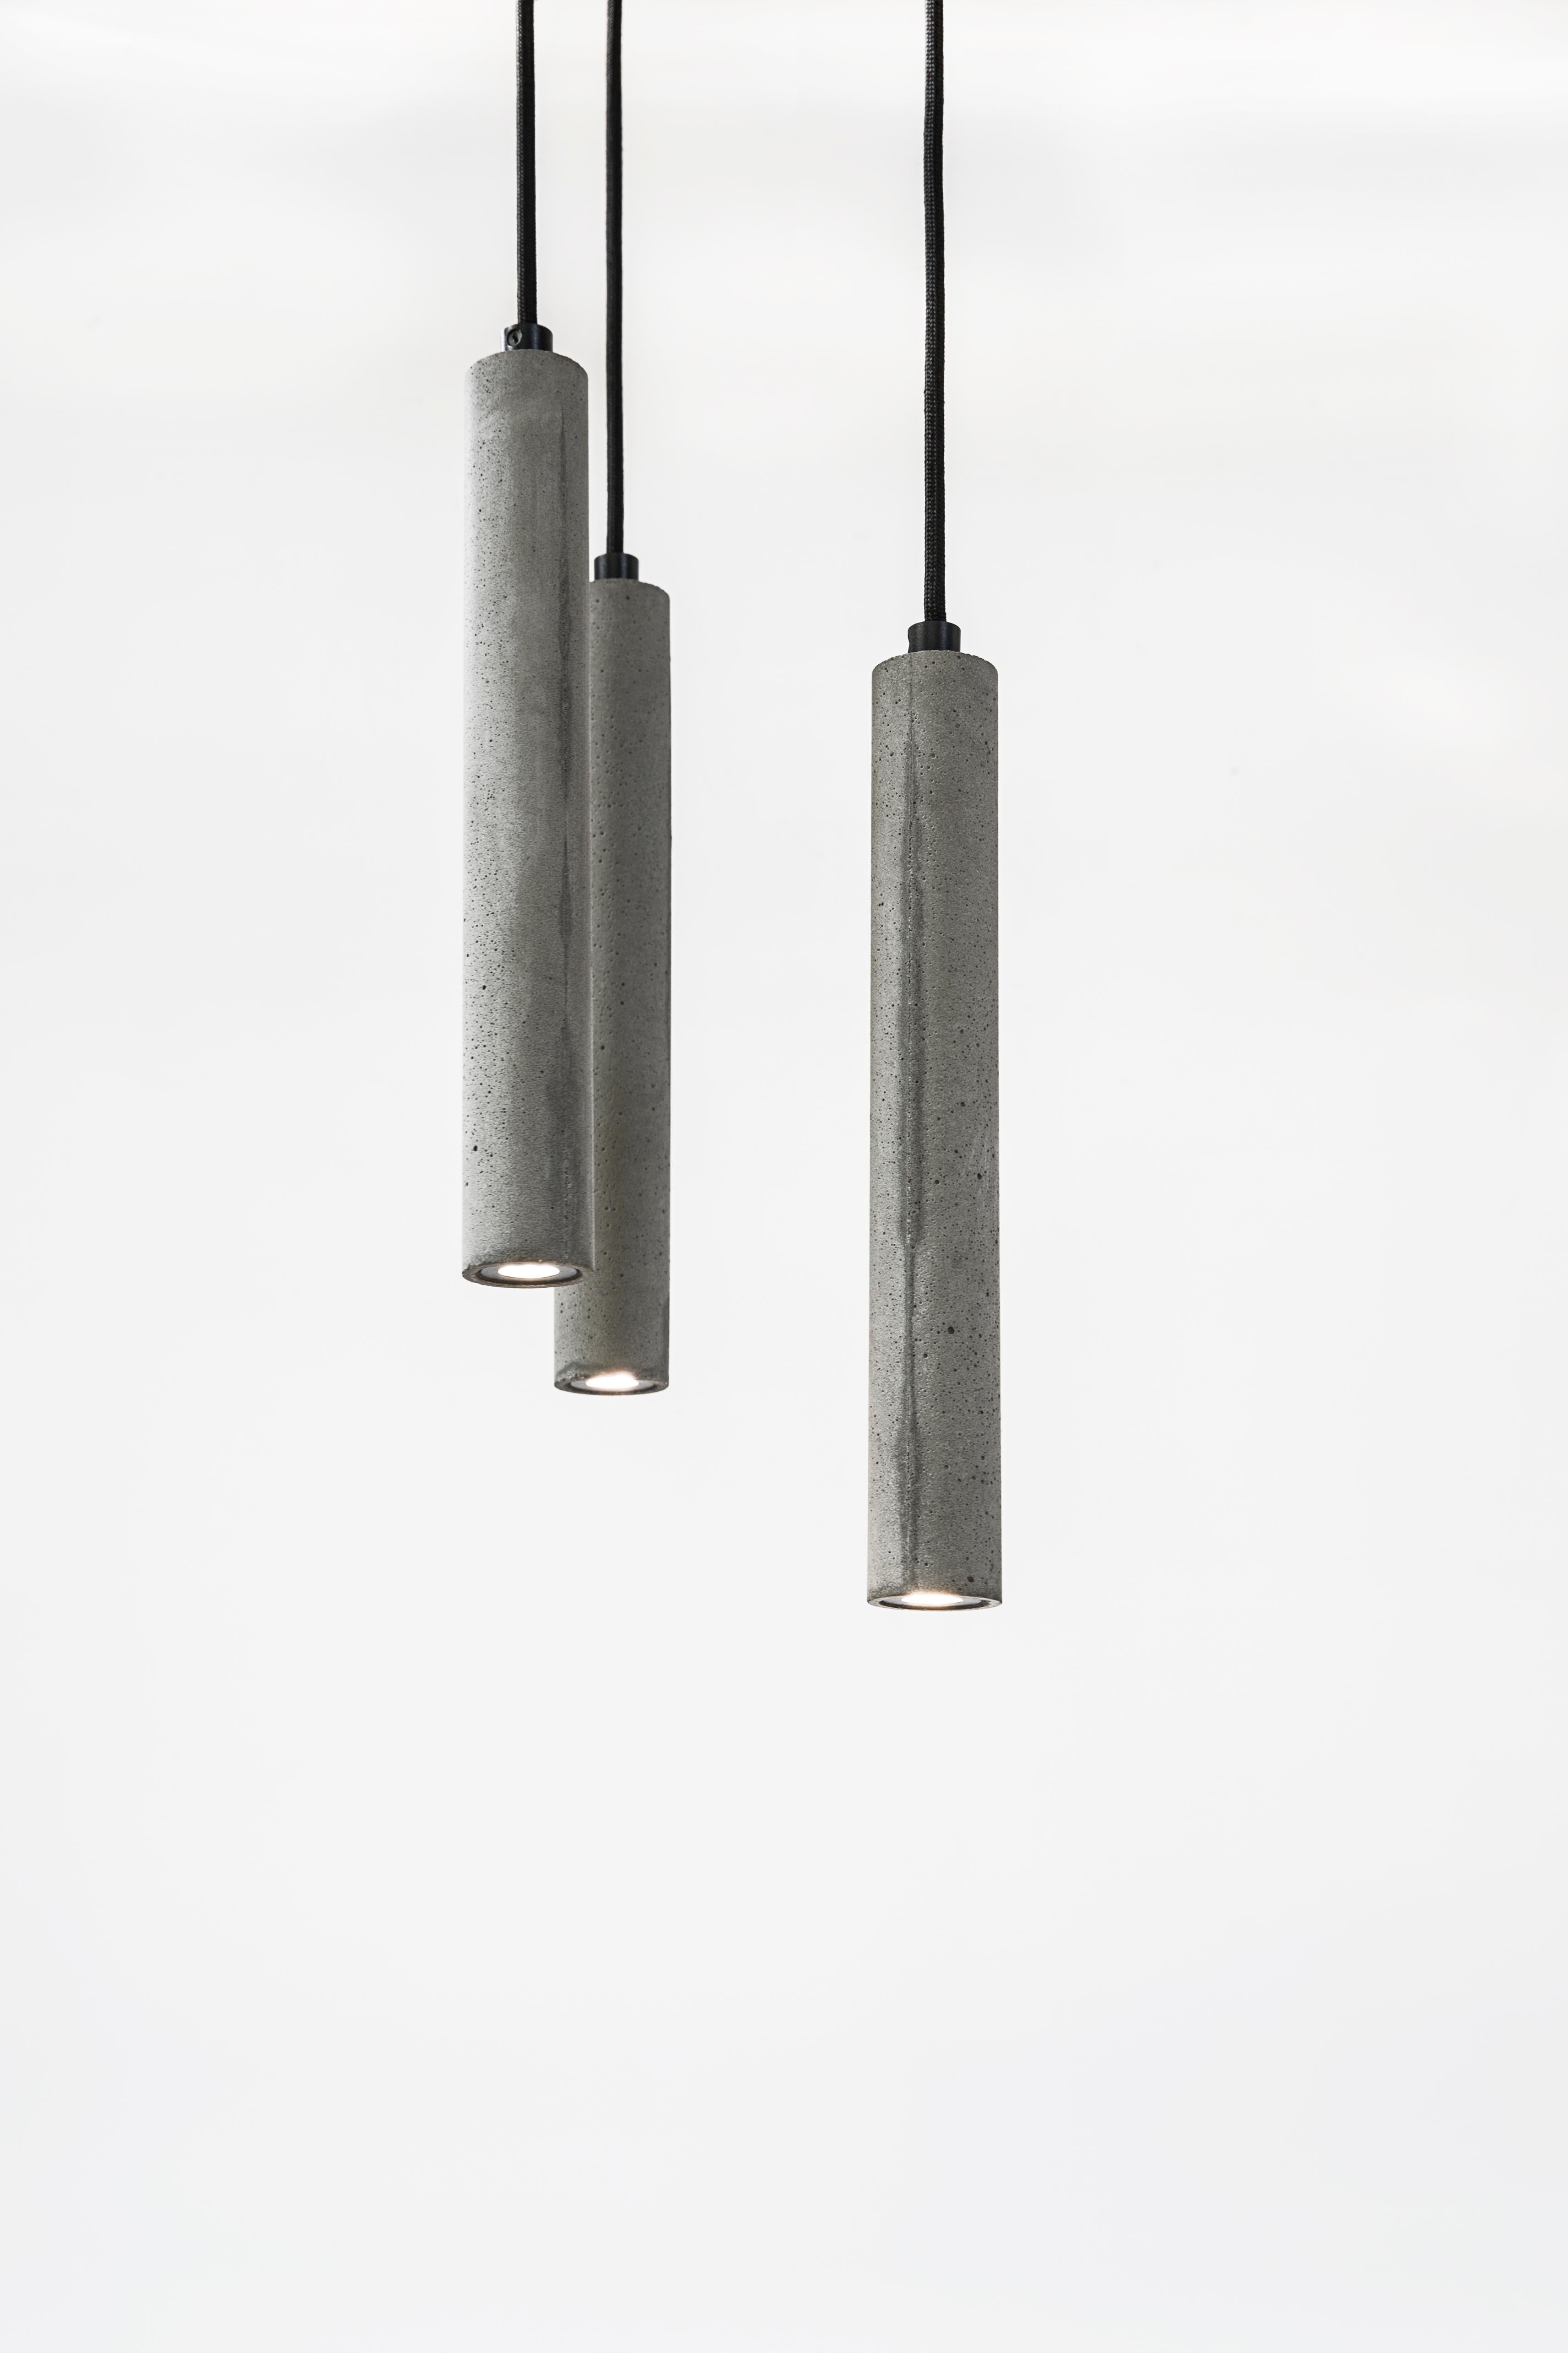 Contemporary Concrete and Aluminum Pendant Lamp, “Bang, ”  from Concrete Collection